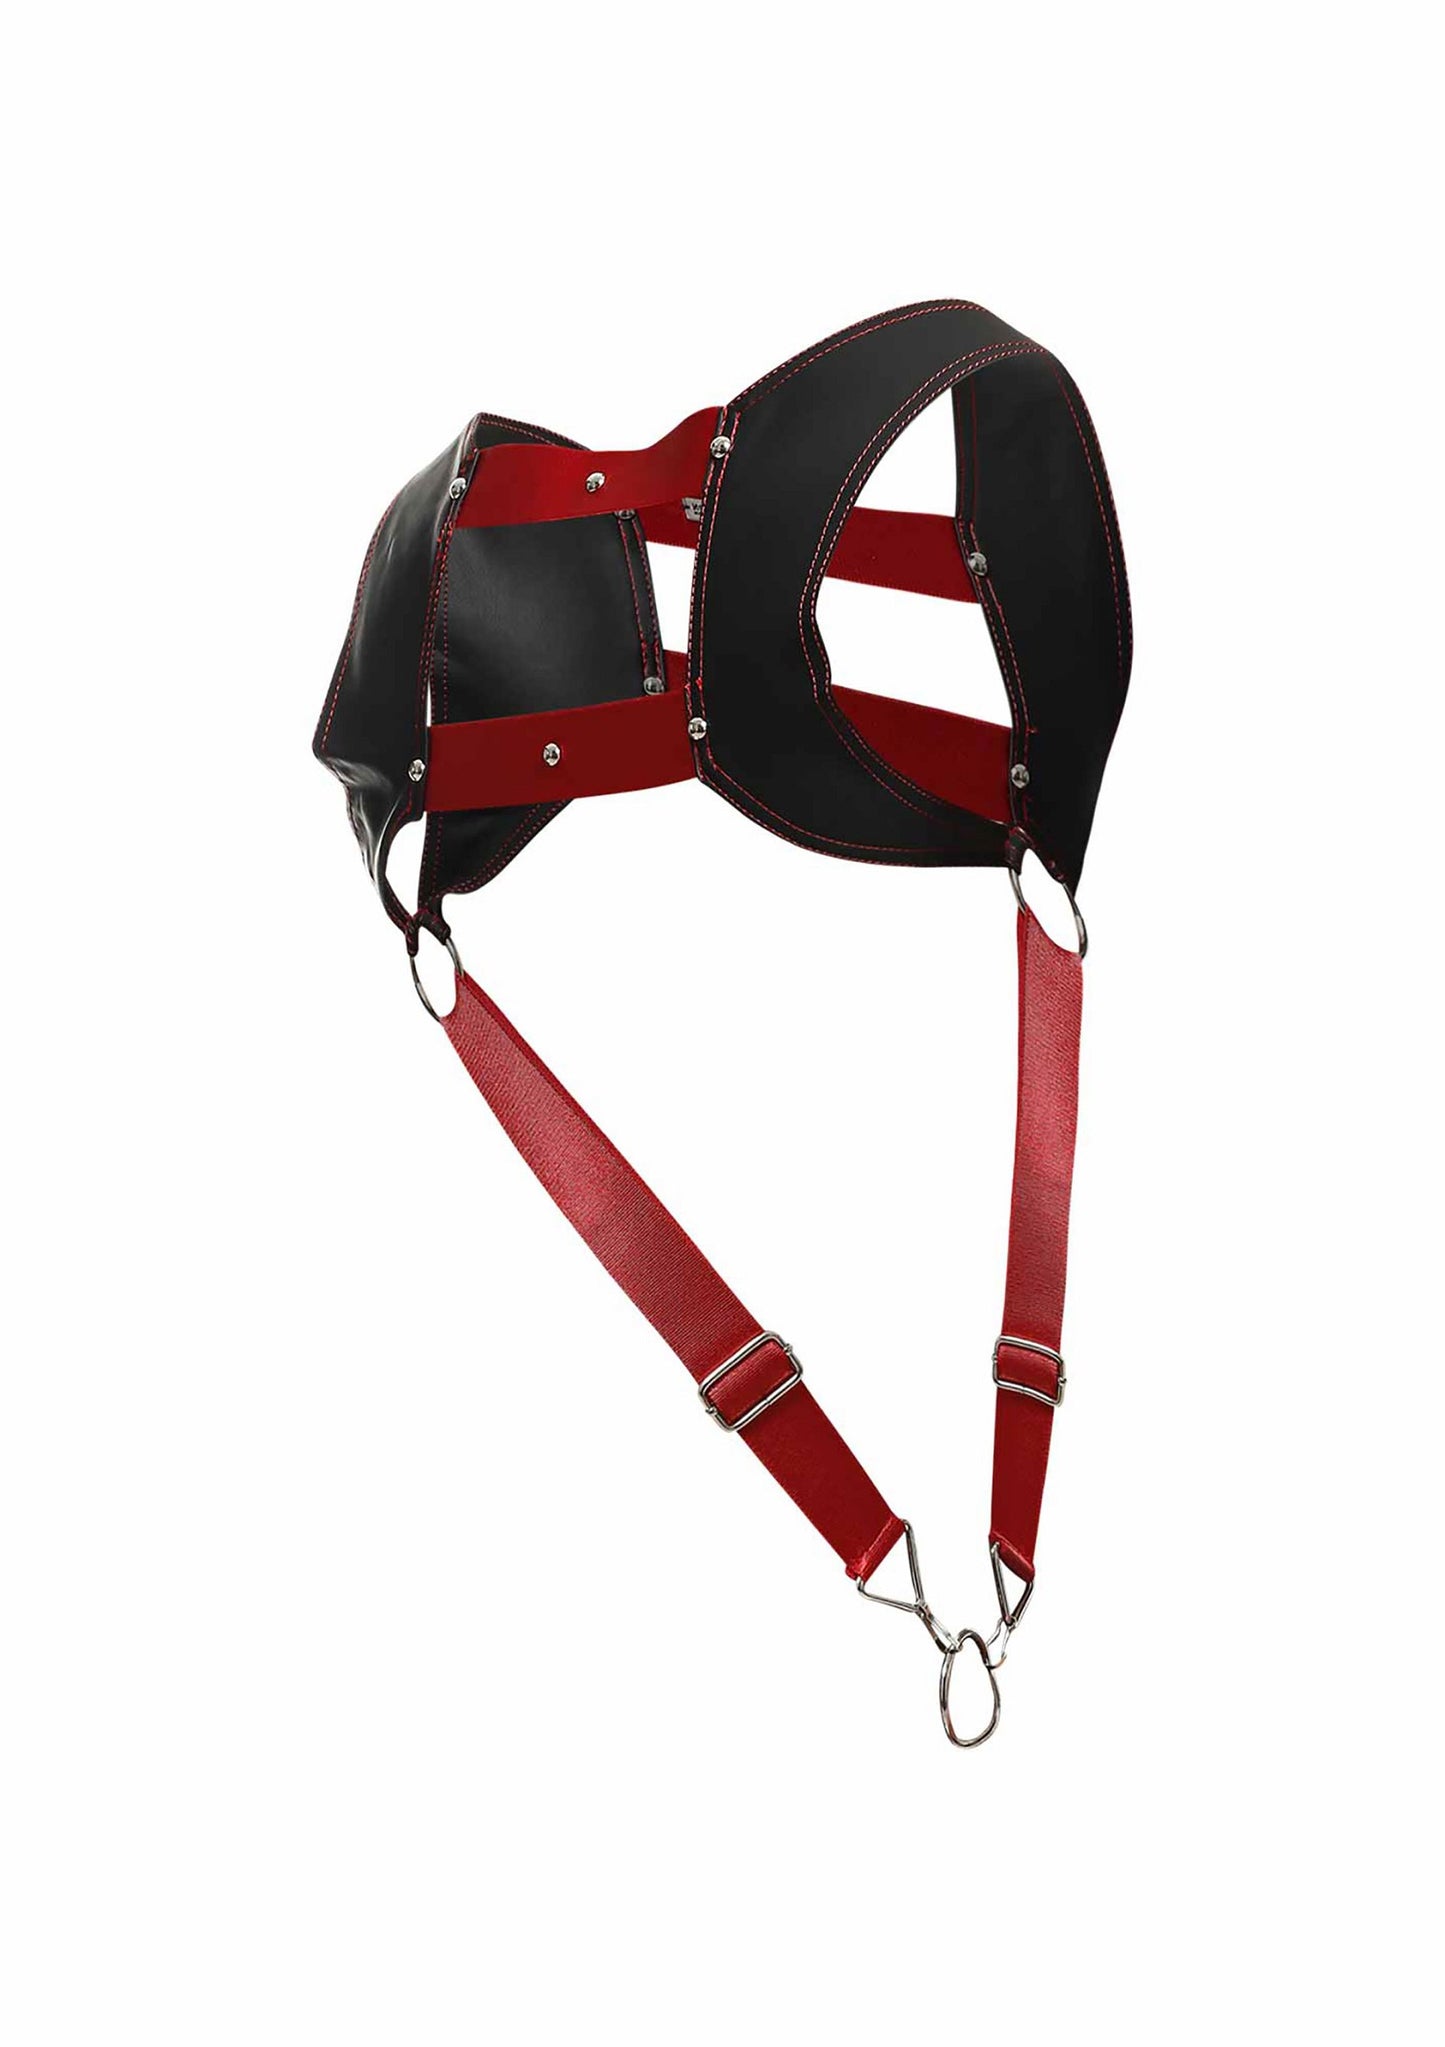 MOB Eroticwear Dngeon Top Cockring Harness RED O/S - 2